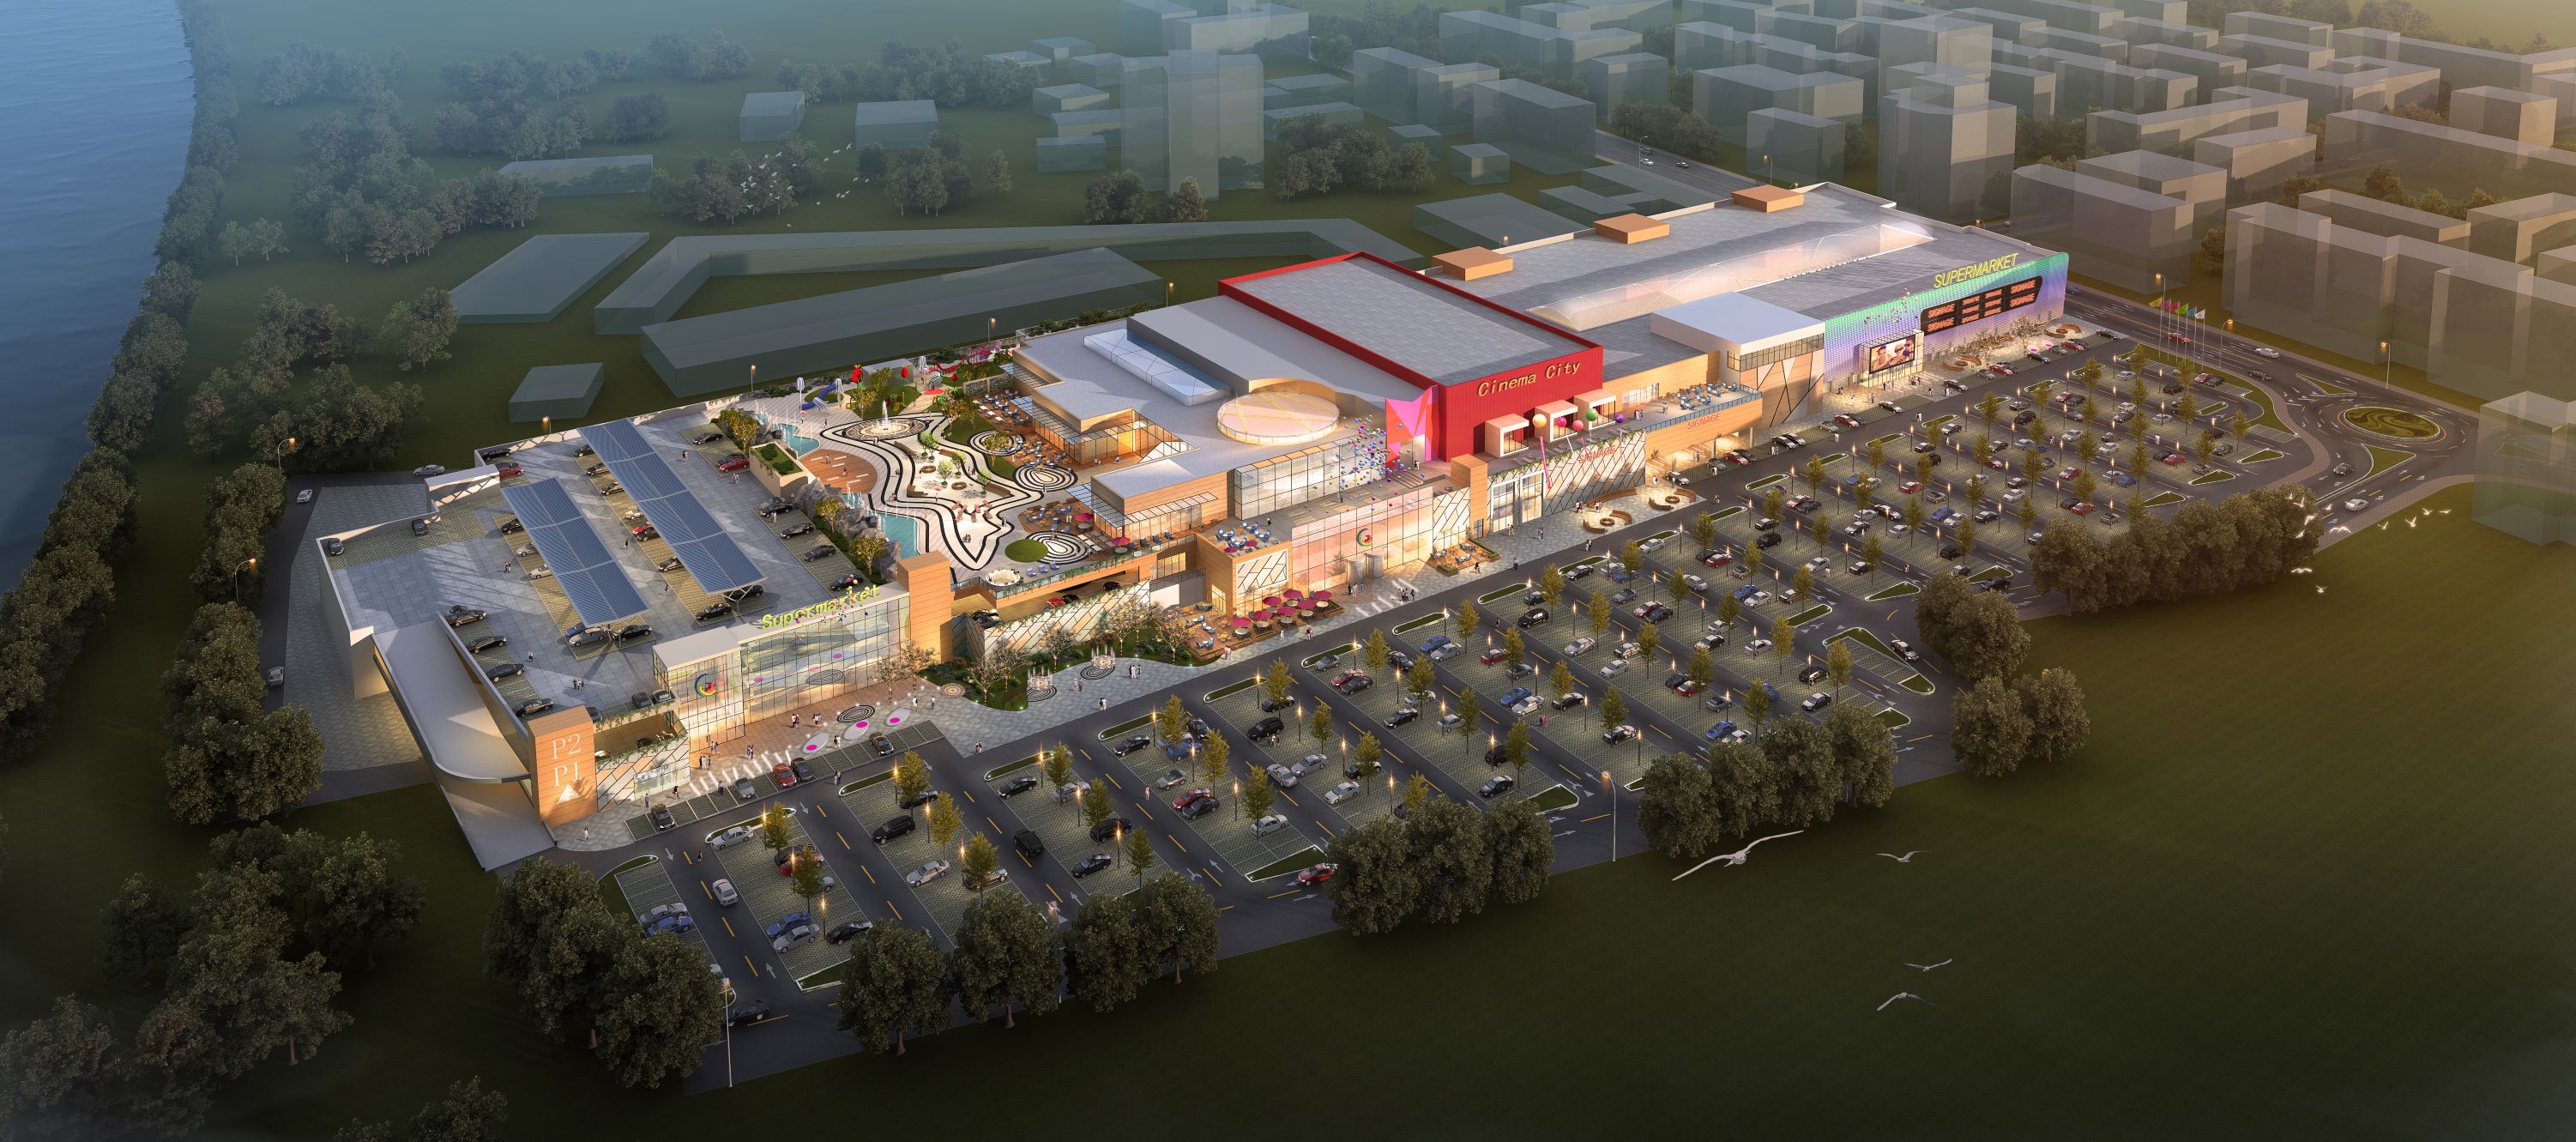 ARENA MALL IS TRANSFORMING, BECOMING A LANDMARK SHOPPING AND ENTERTAINMENT DESTINATION FOR BACAU RESIDENTS ALL AGES - Cushman Wakefield Echinox